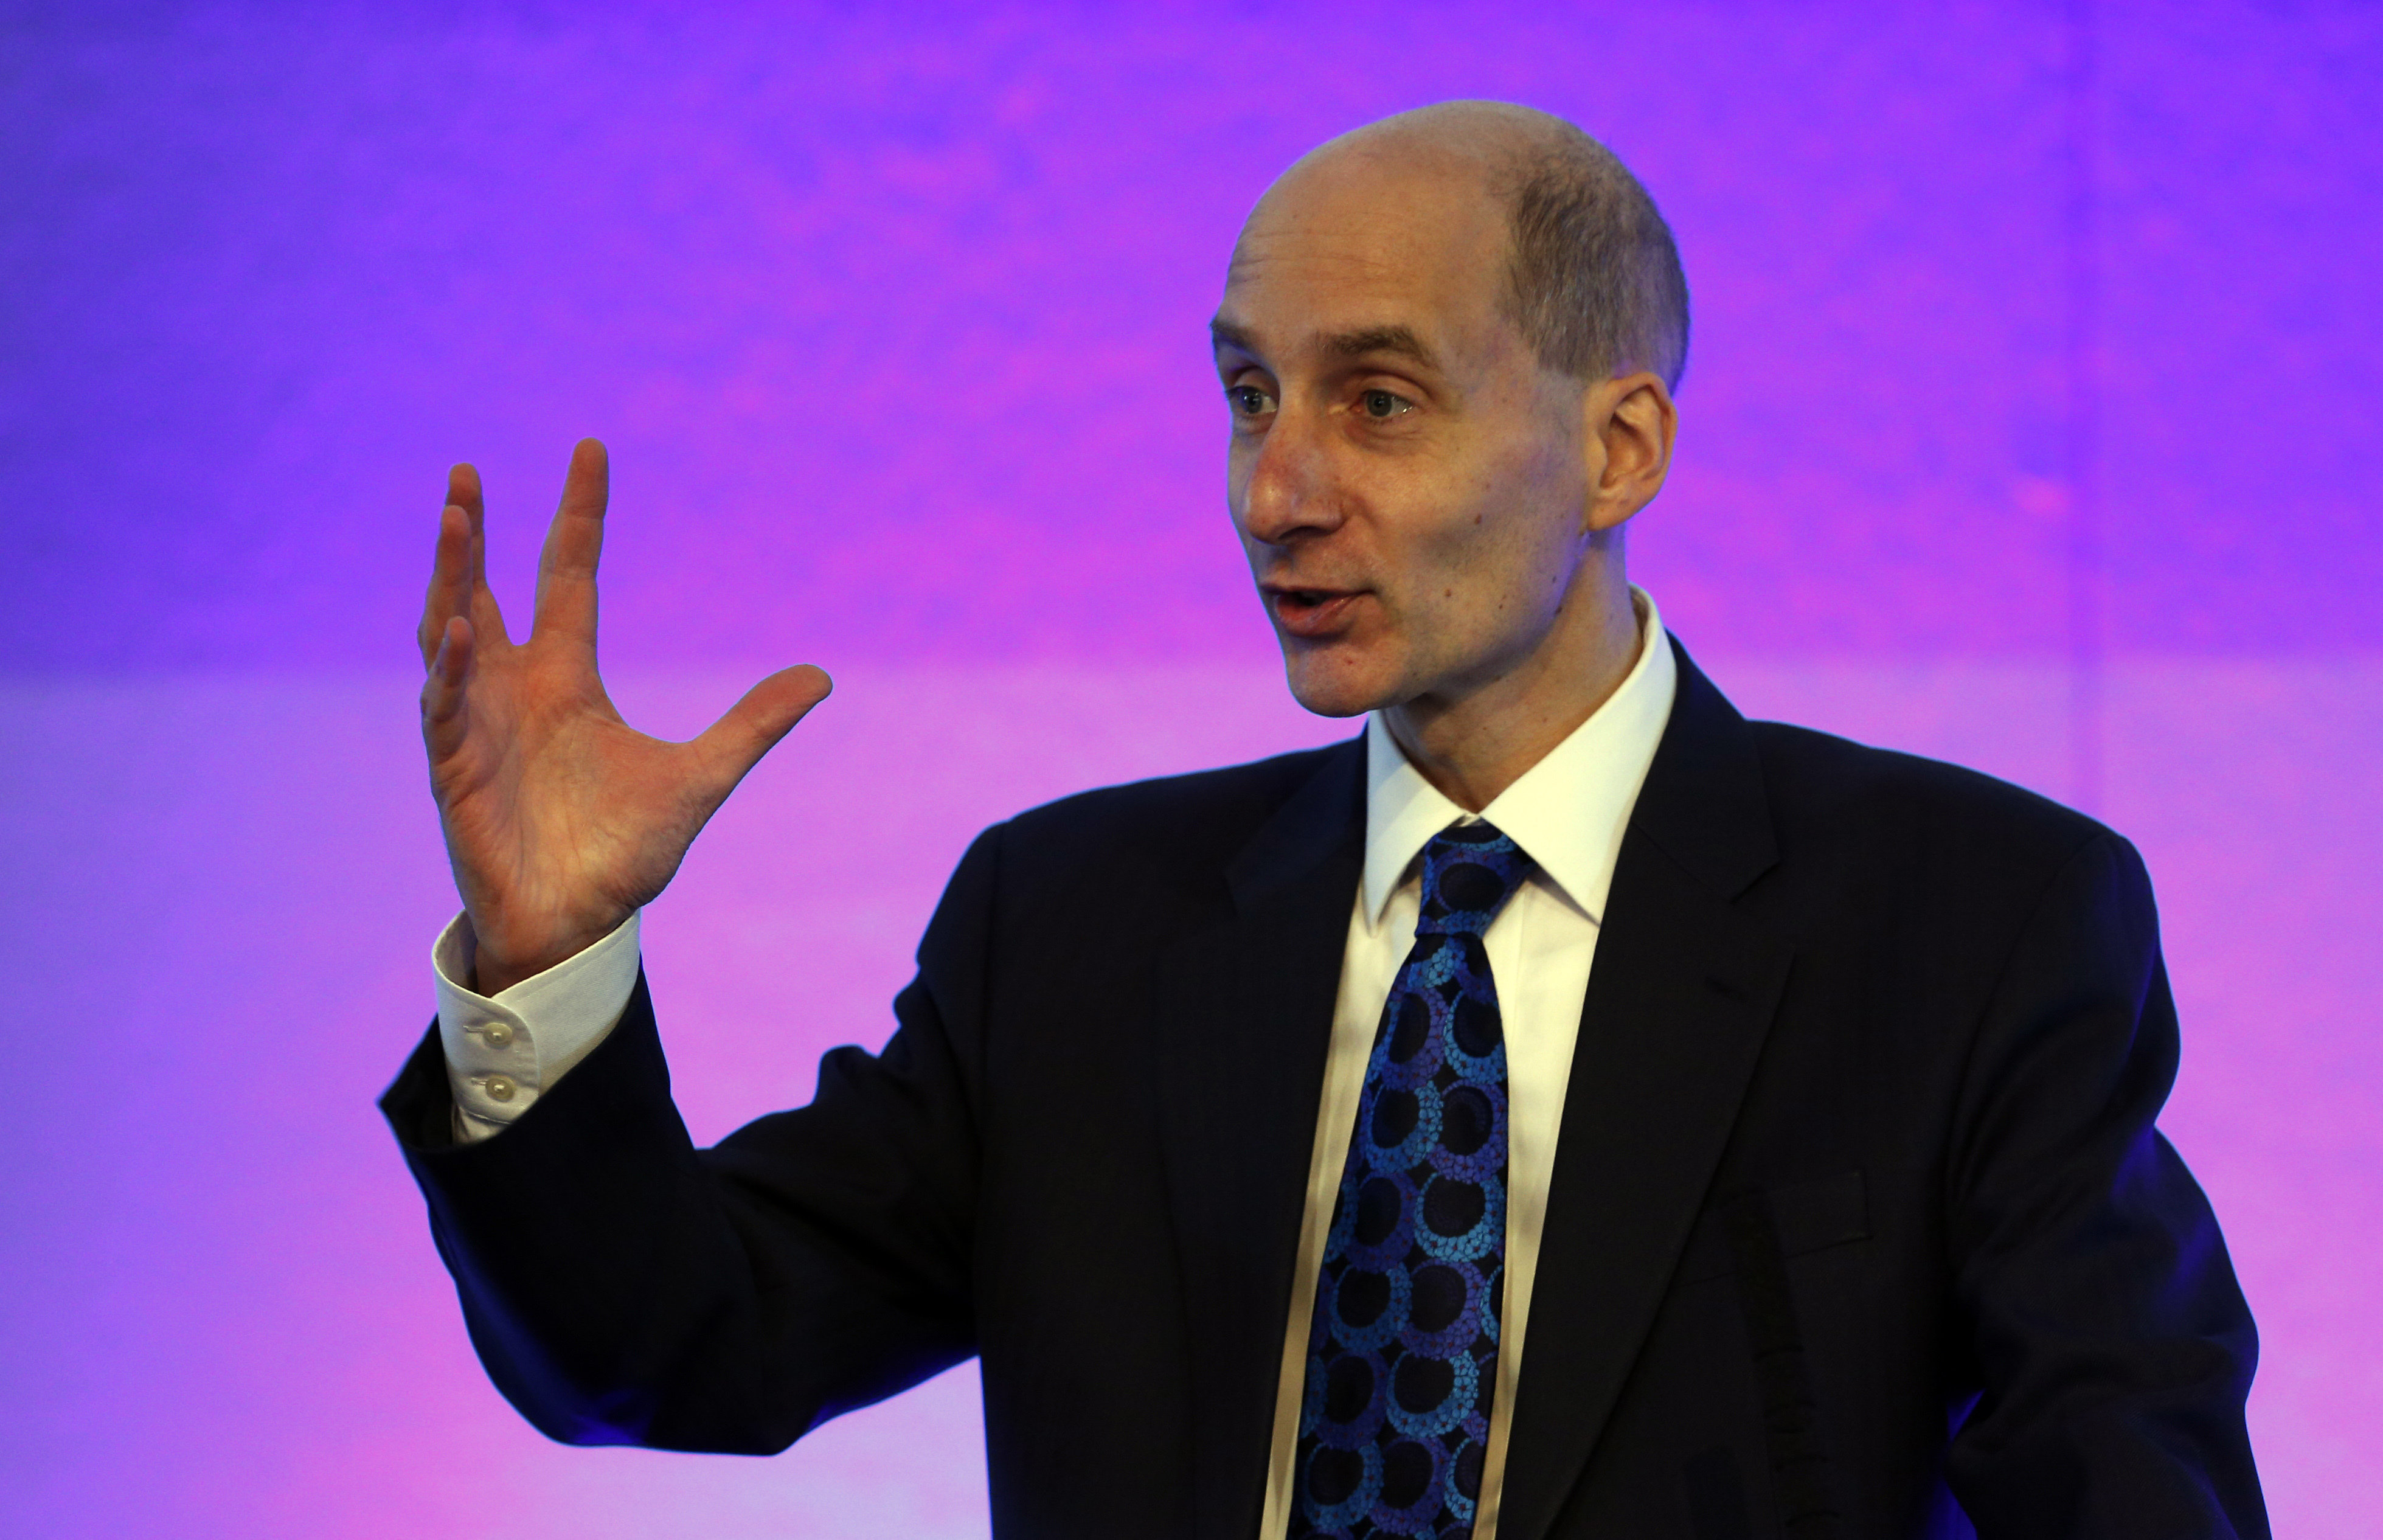 Lord Adonis called the former Bath Spa University chancellor's pay 'outrageous' and said it shook confidence in tuition fees